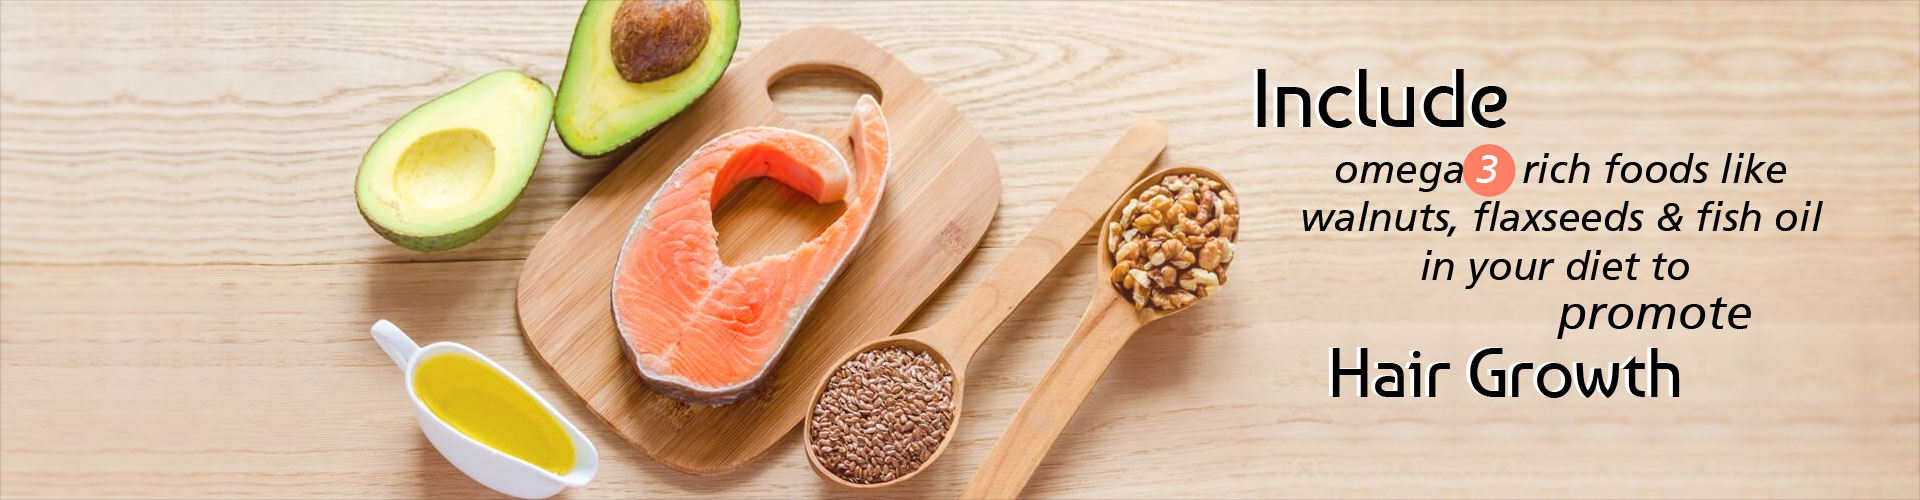 Include omega 3 rich foods like walnuts, flaxseeds and fish oil in your diet to promote hair growth.  